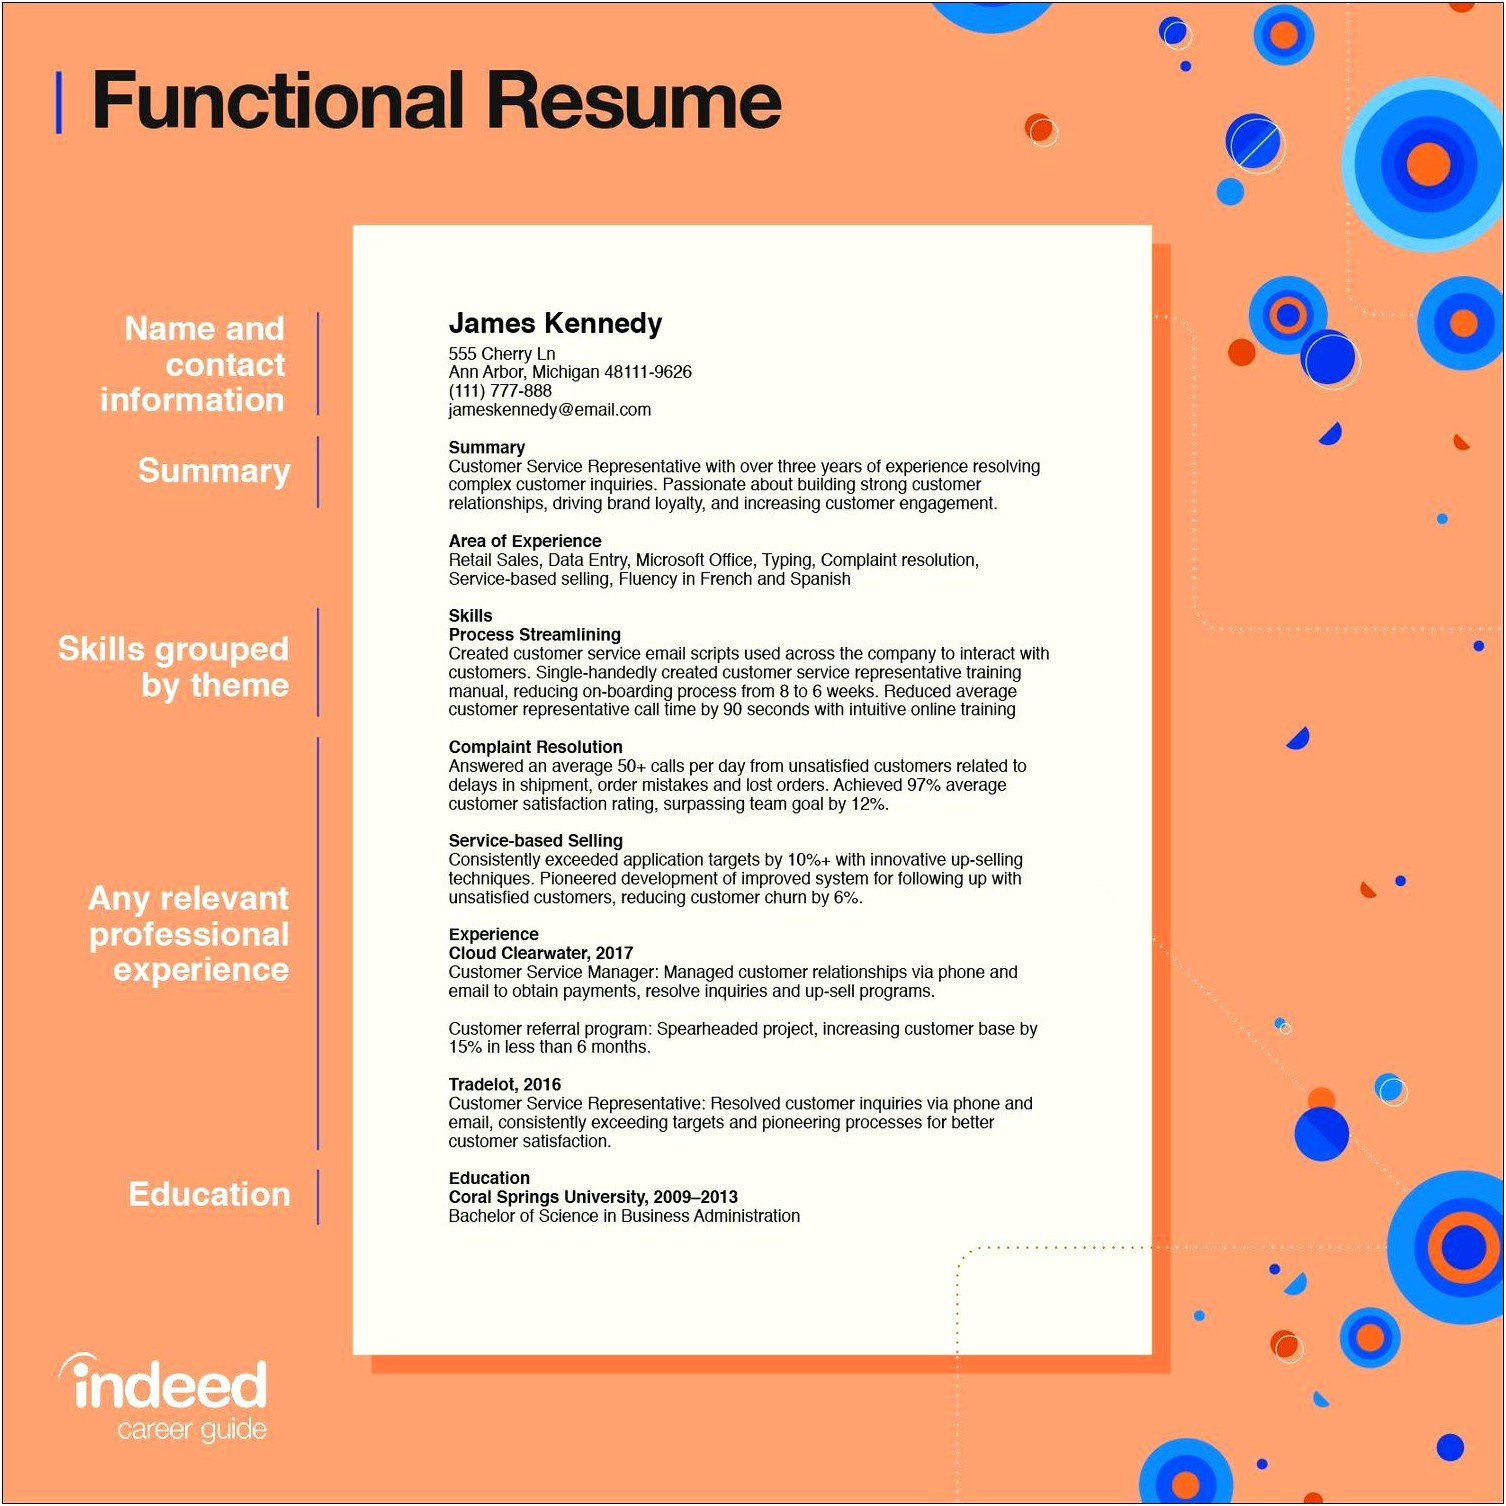 Examples Of Functional Skills For Resume